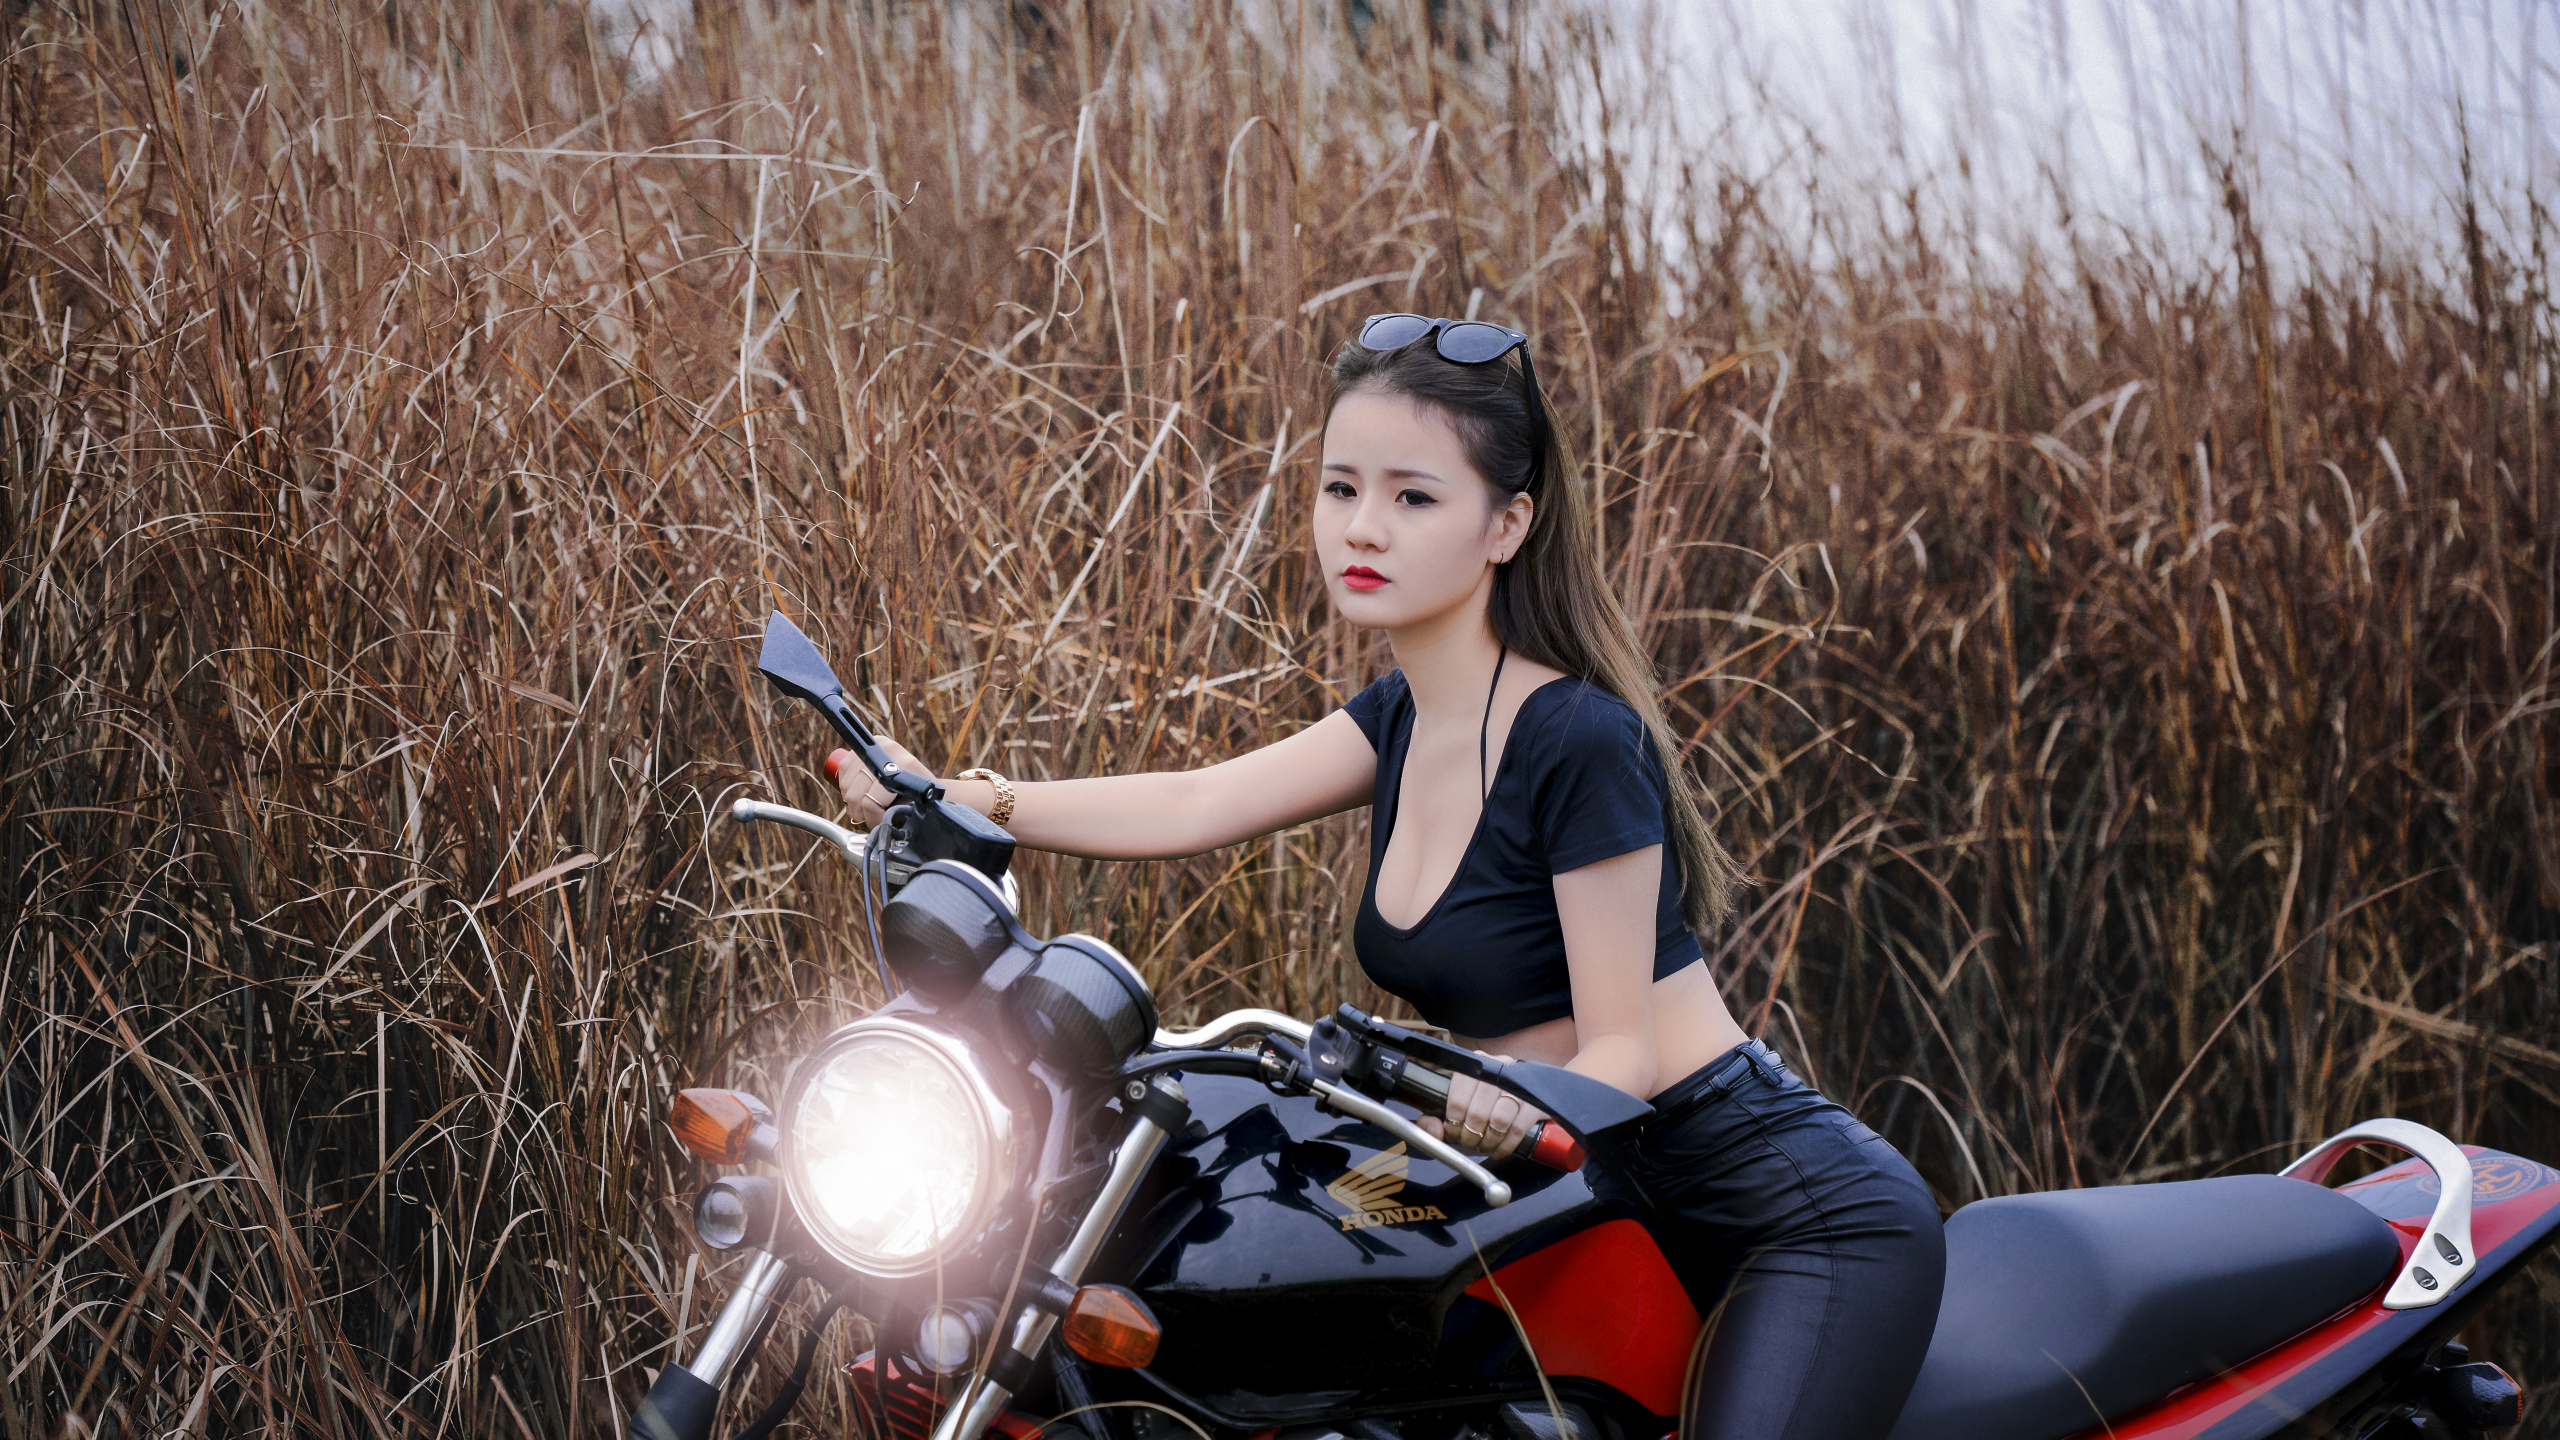 Woman in Black Tank Top and Black Leggings Sitting on Red and Black Motorcycle. Wallpaper in 2560x1440 Resolution